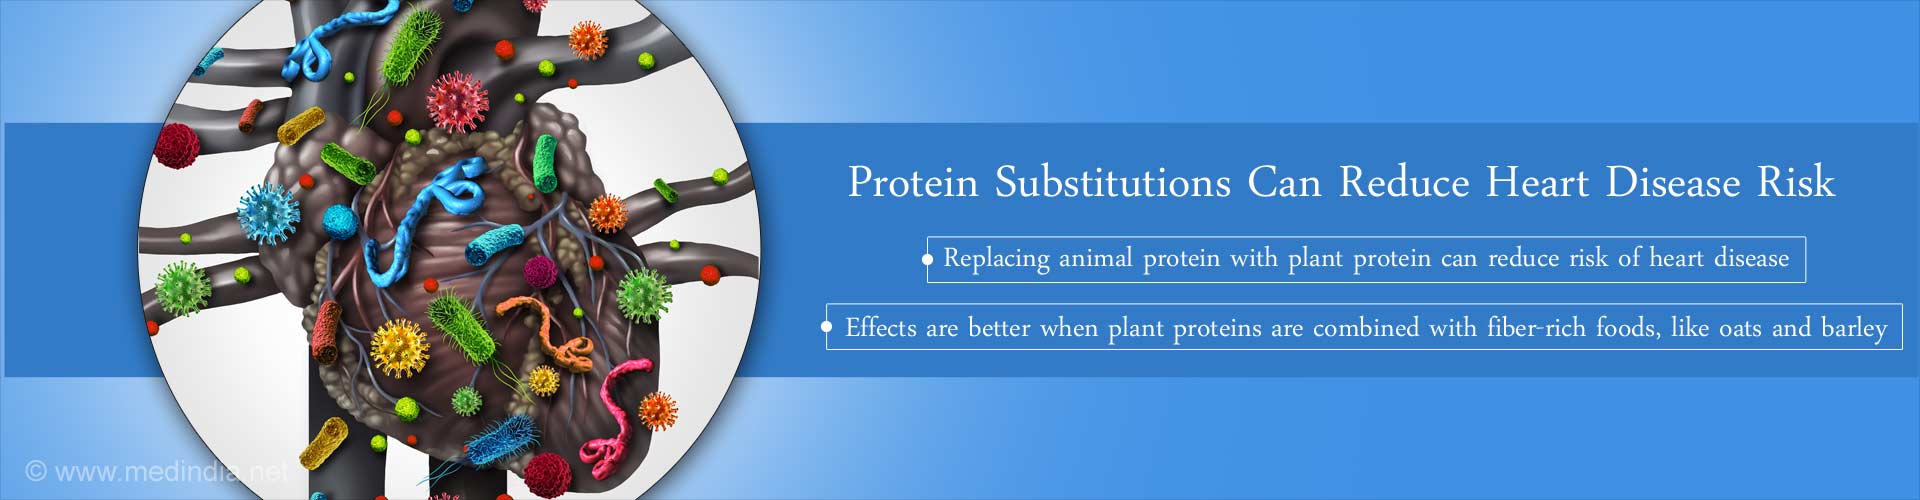 protein substitutions can reduce heart disease risk
- replacing animal protein with plant protein can reduce risk of heart disease
- effects are better when plant proteins are combined with fiber-rich foods, like oats and barley
